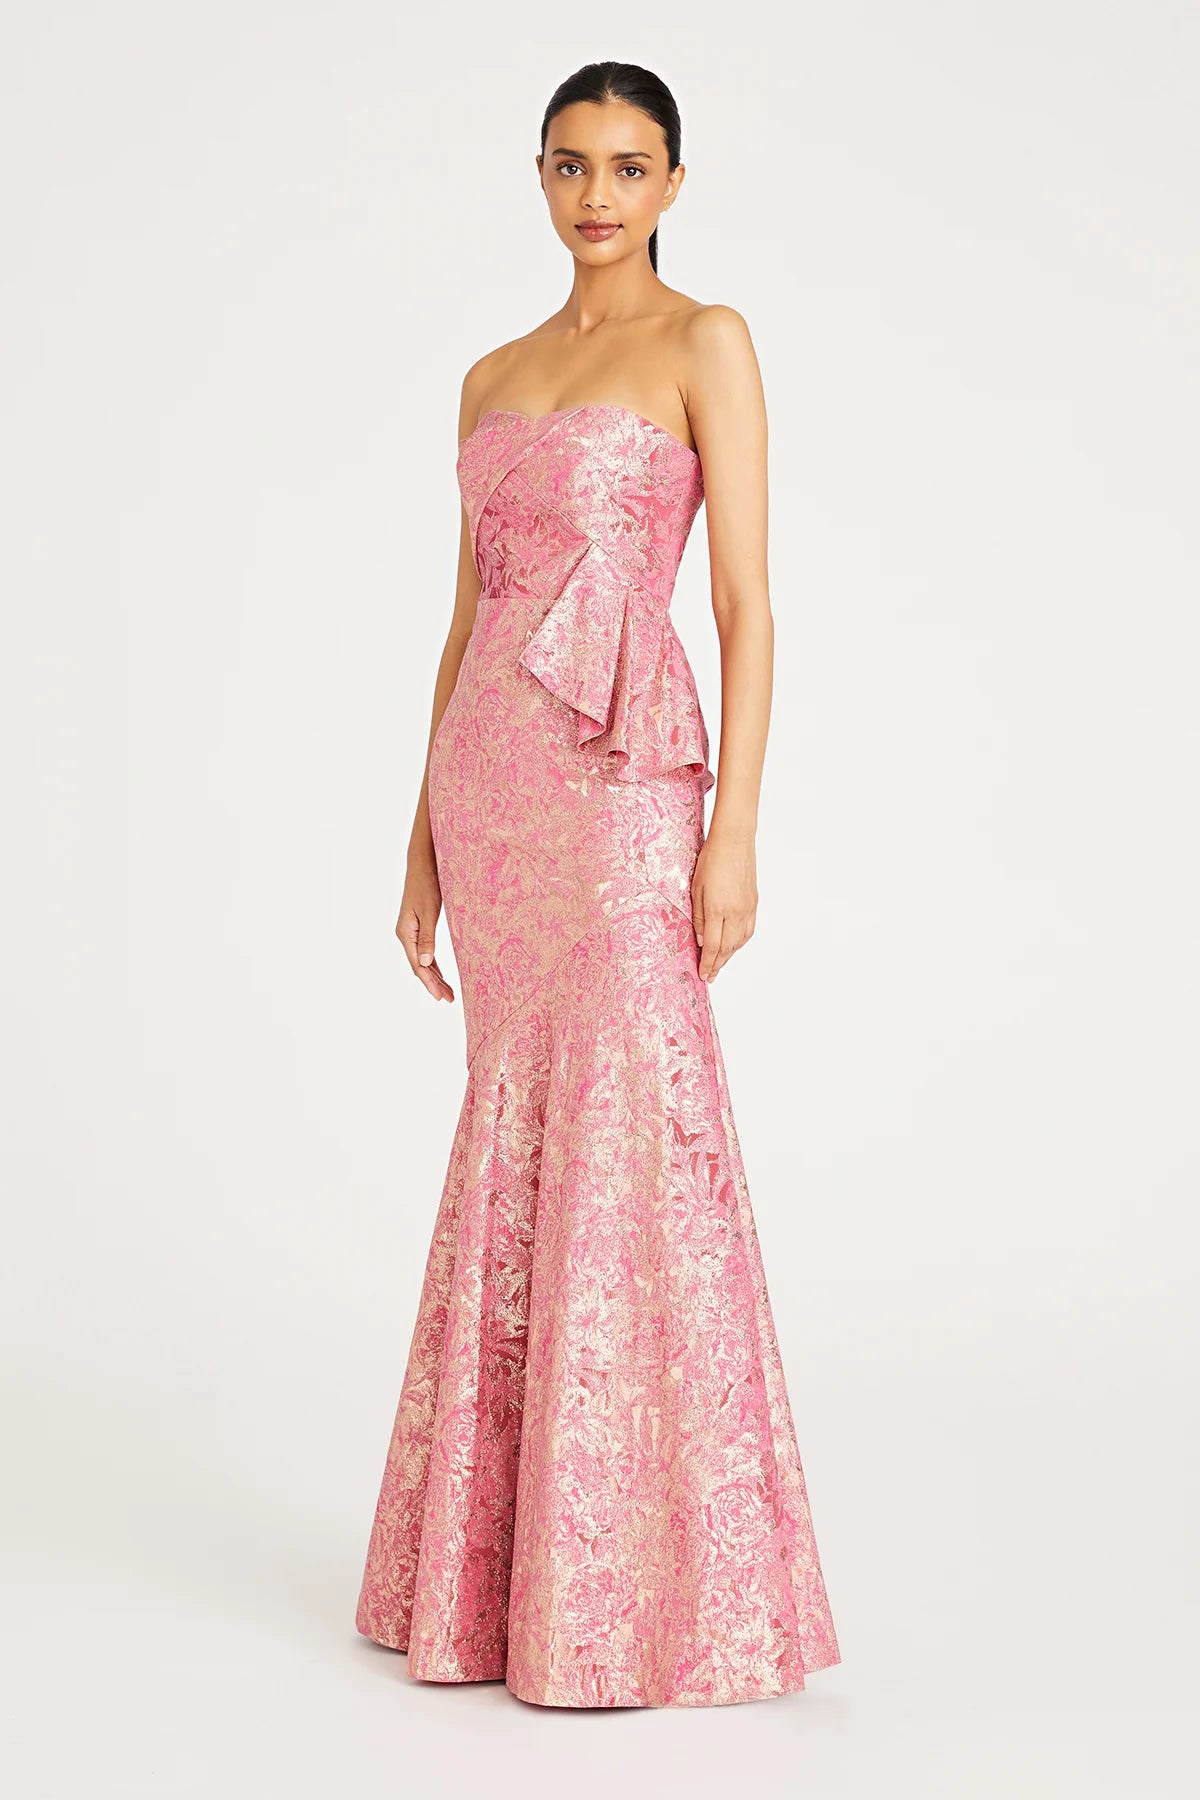 Shop the exquisite charm of Madeline's Boutique with this stunning Theia strapless dress. Style number 8819846 in camellia color. Embrace the fitted, fit-and-flare silhouette crafted from high-stretch jacquard fabric. Perfect for any occasion. Visit our Toronto and Boca Raton locations for a personalized shopping experience.